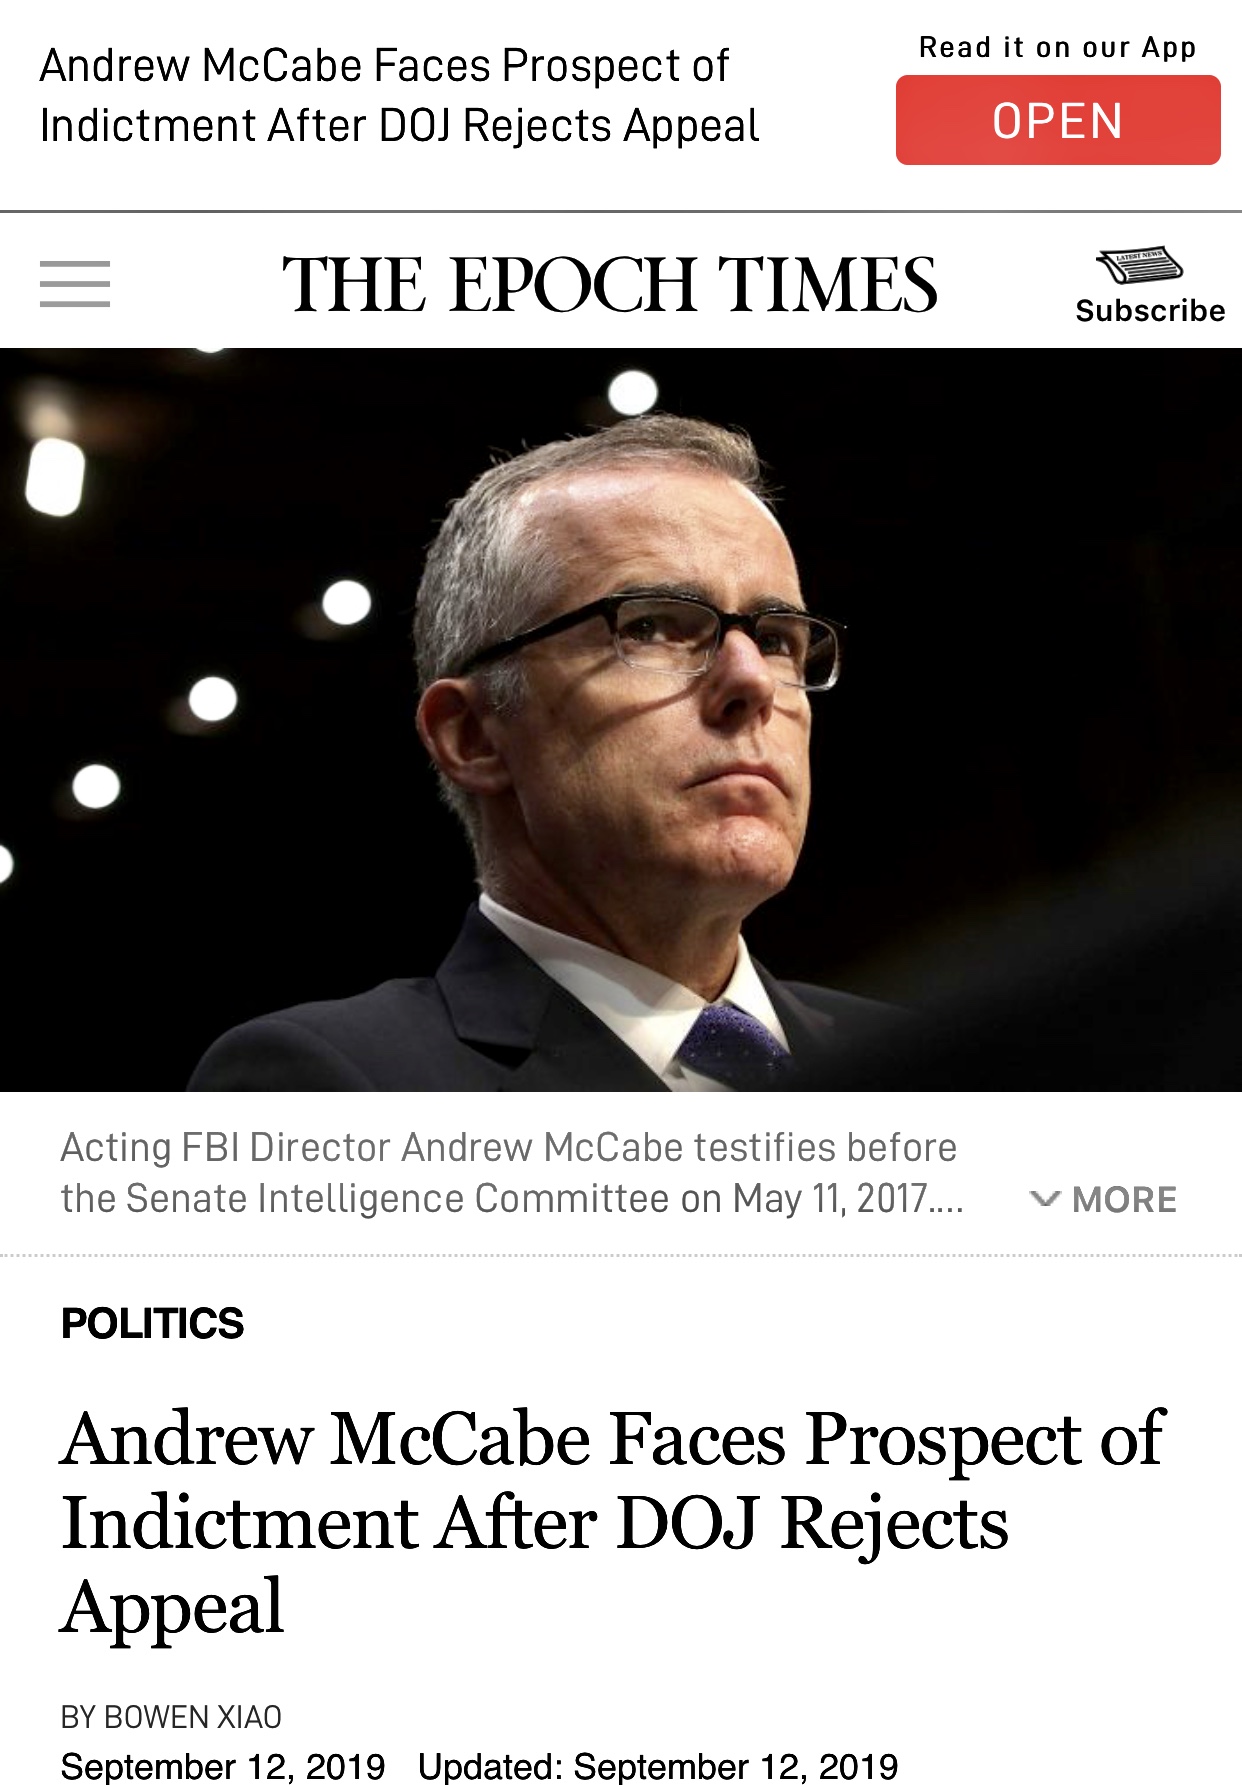 Andrew McCabe Faces Prospect of Indictment After DOJ Rejects Appeal